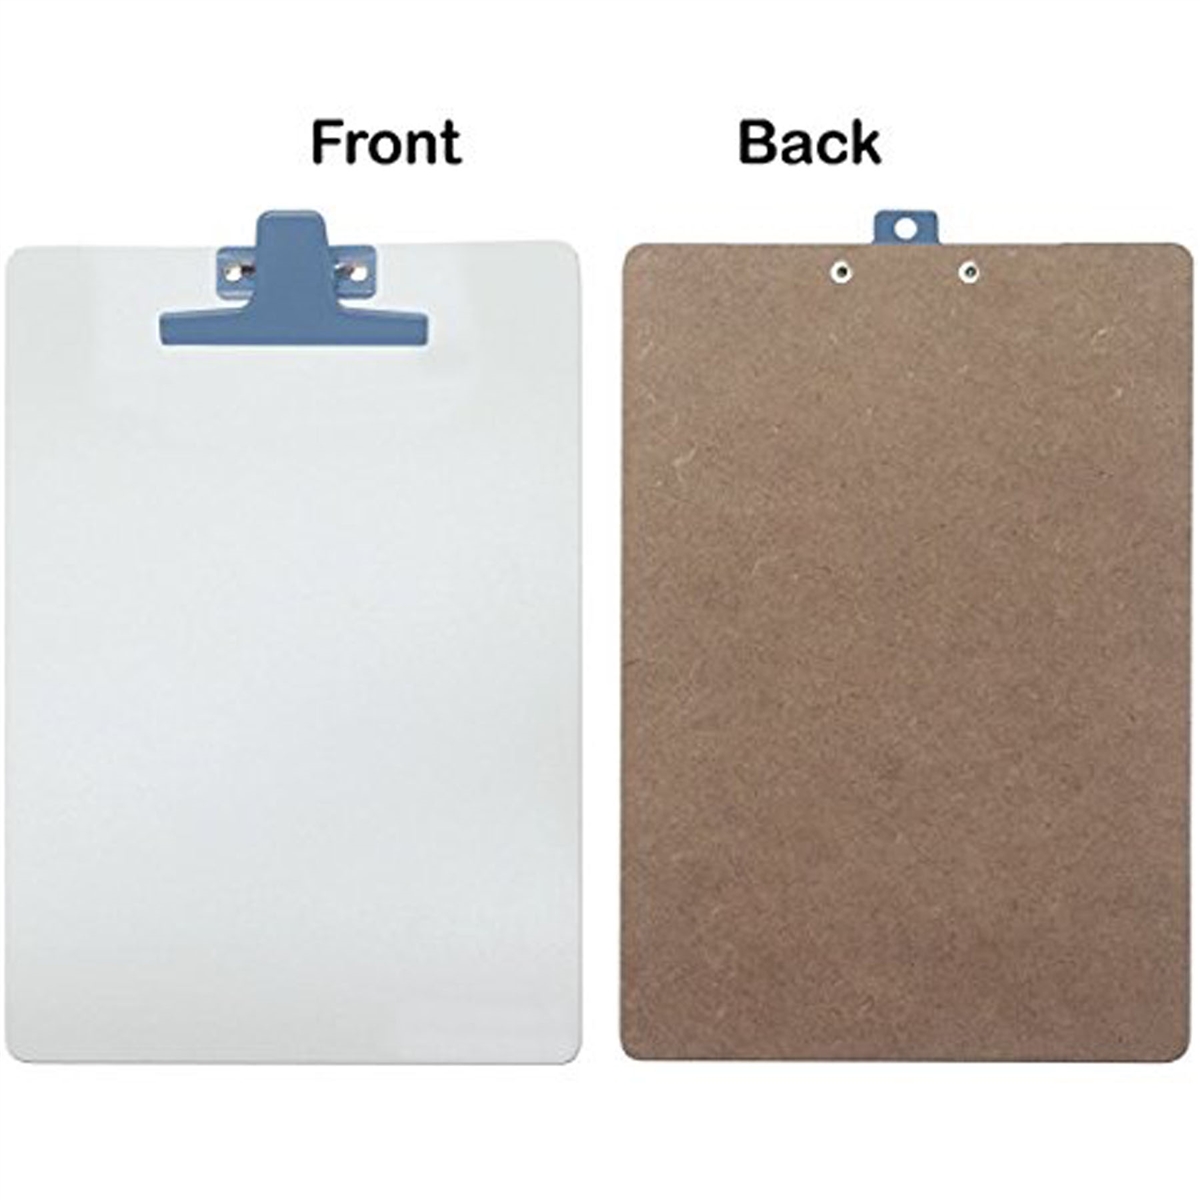 11x17 Clipboard Acrylic Panel Featuring an Arch Clip White